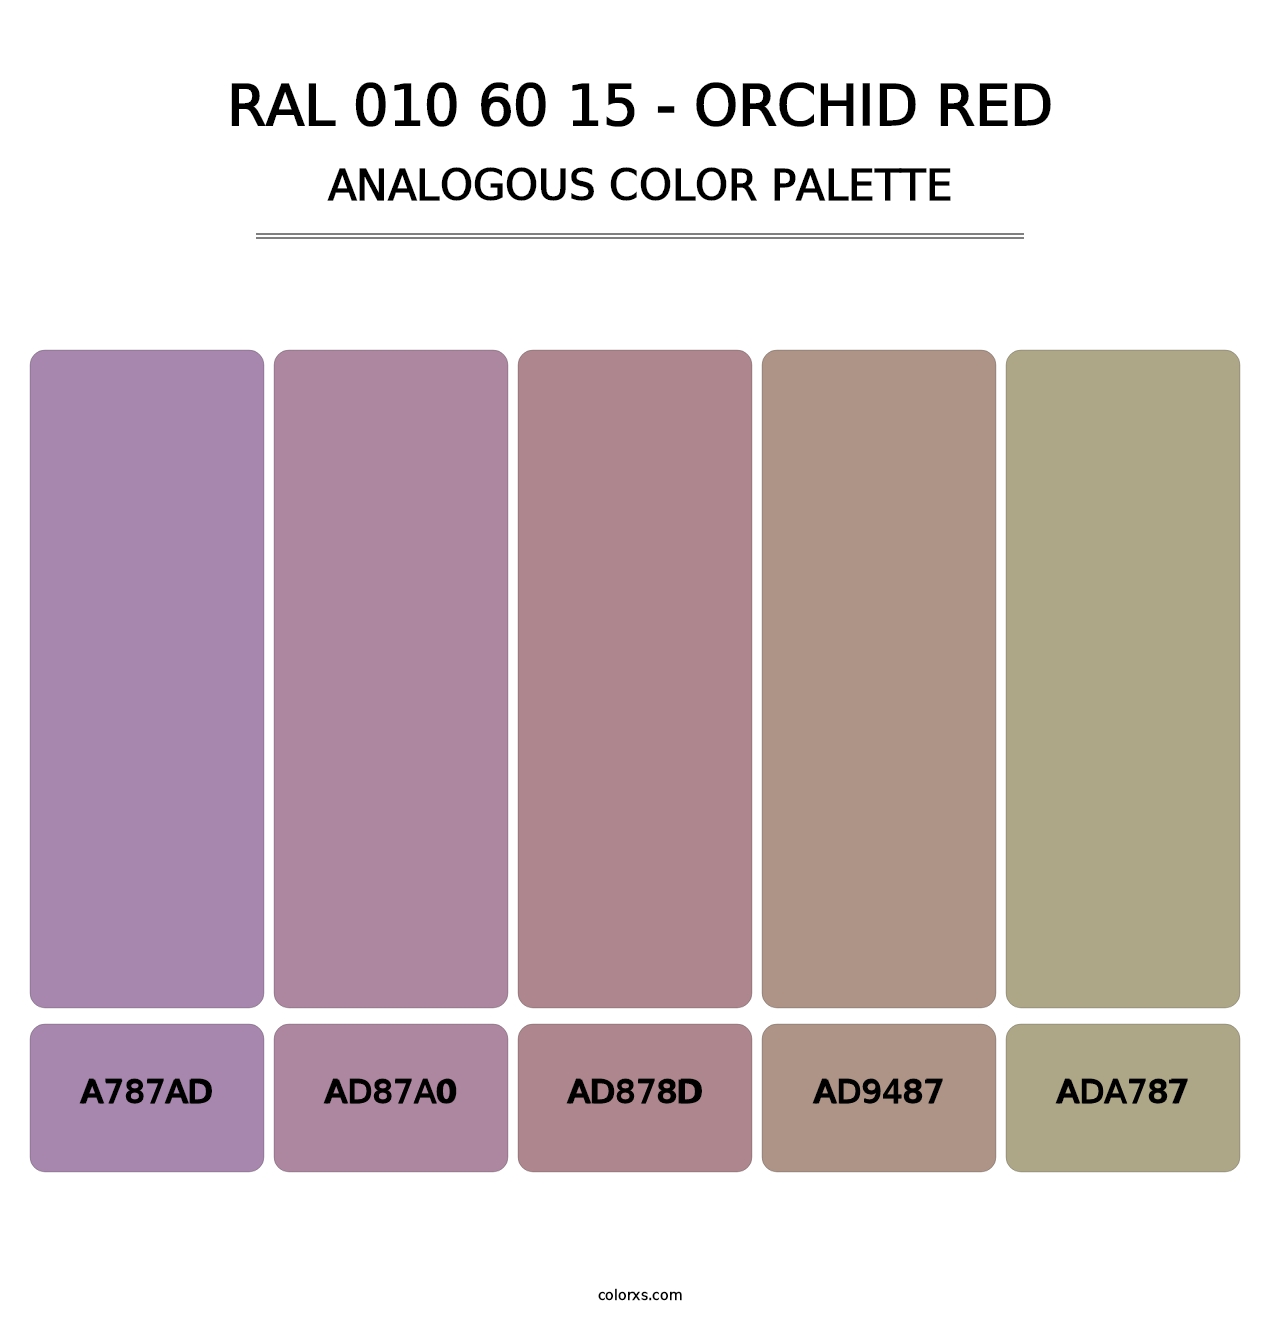 RAL 010 60 15 - Orchid Red - Analogous Color Palette